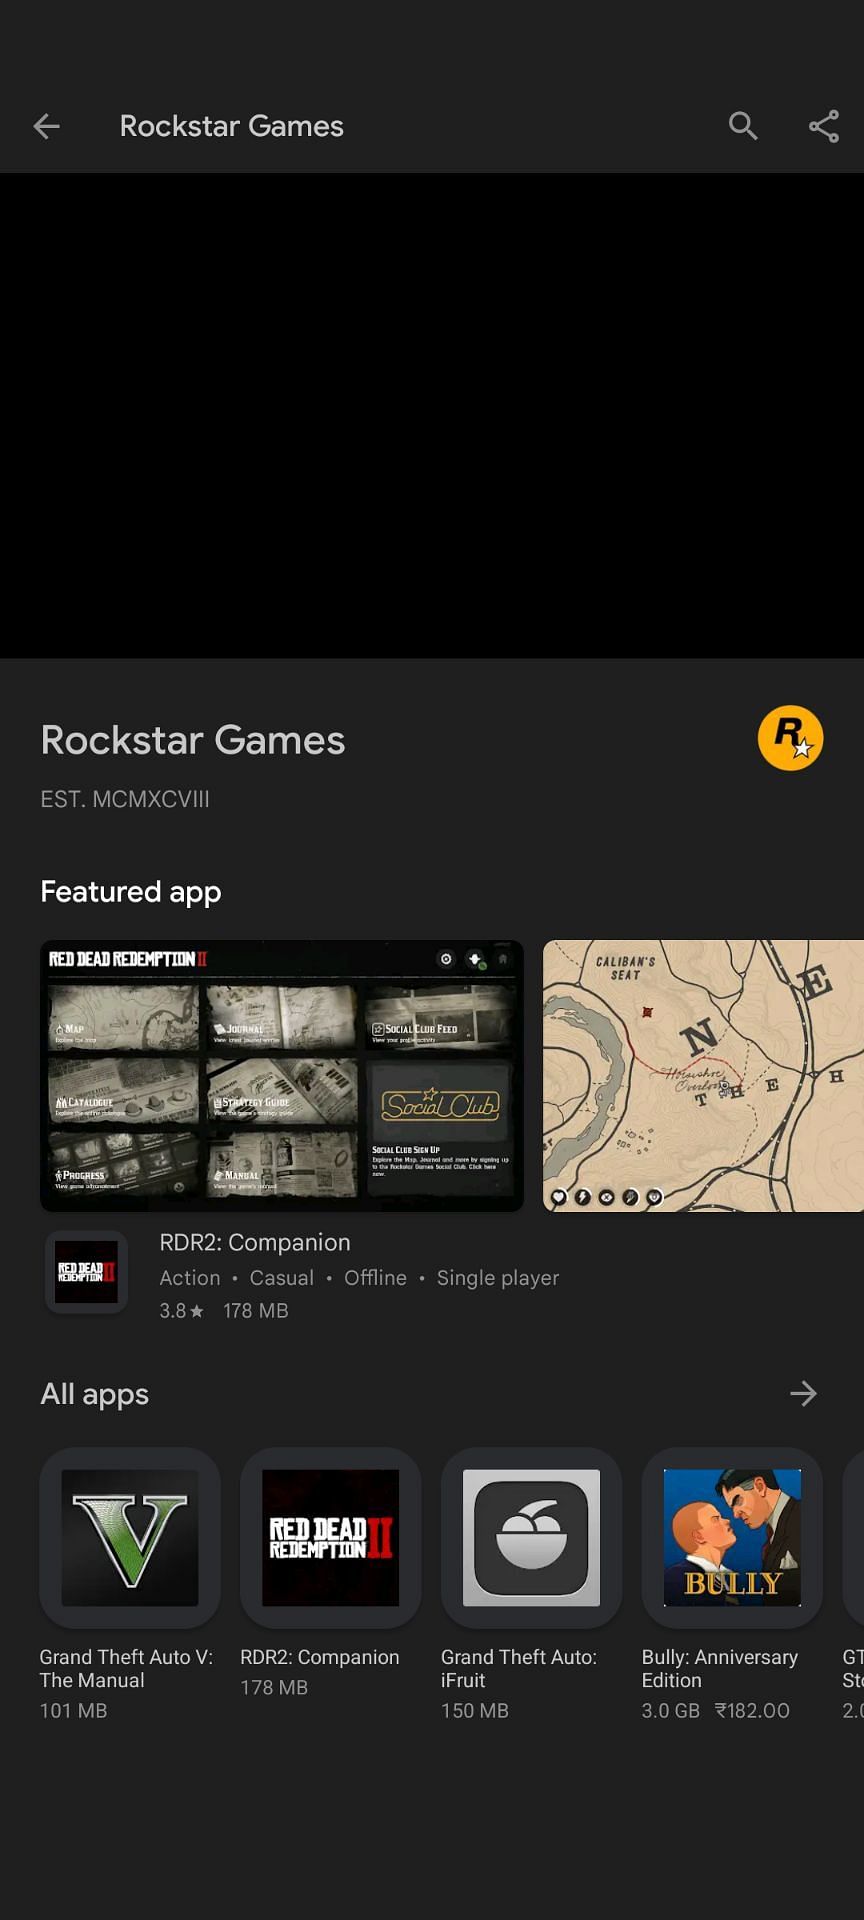 Games by Rockstar on the Play Store (Image via Google Play Store)